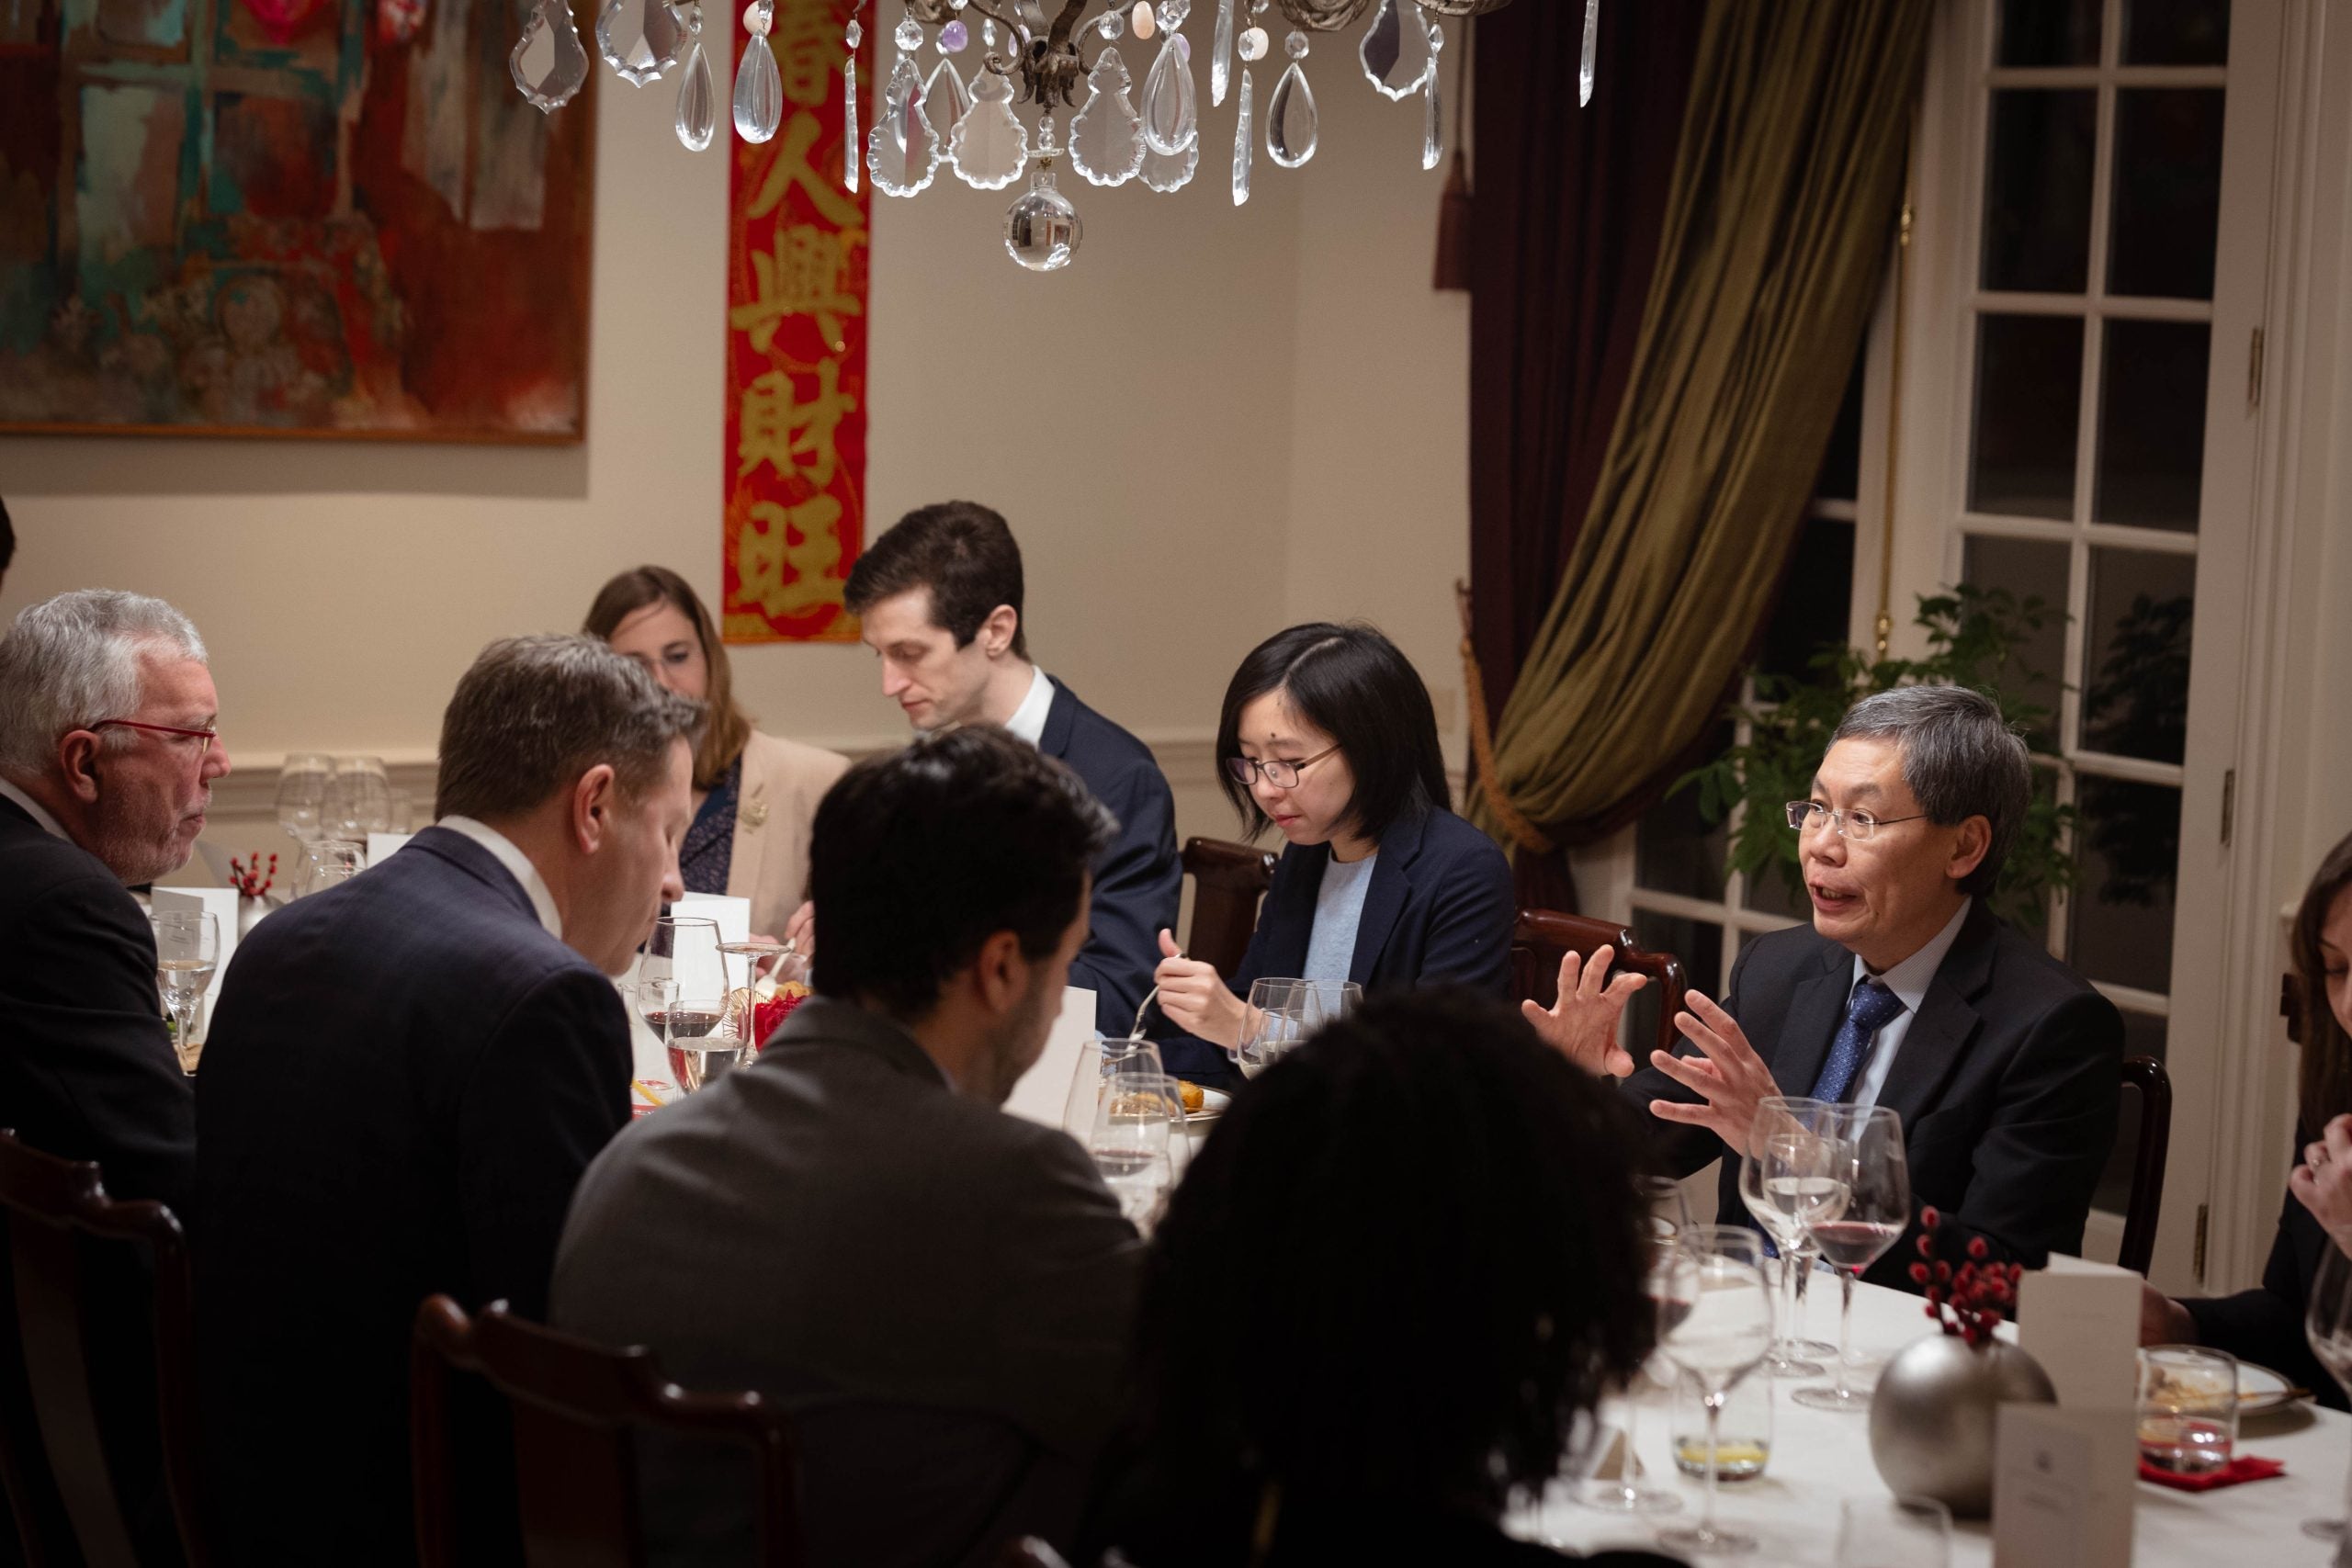 A man talks at a table of people during a formal dinner 